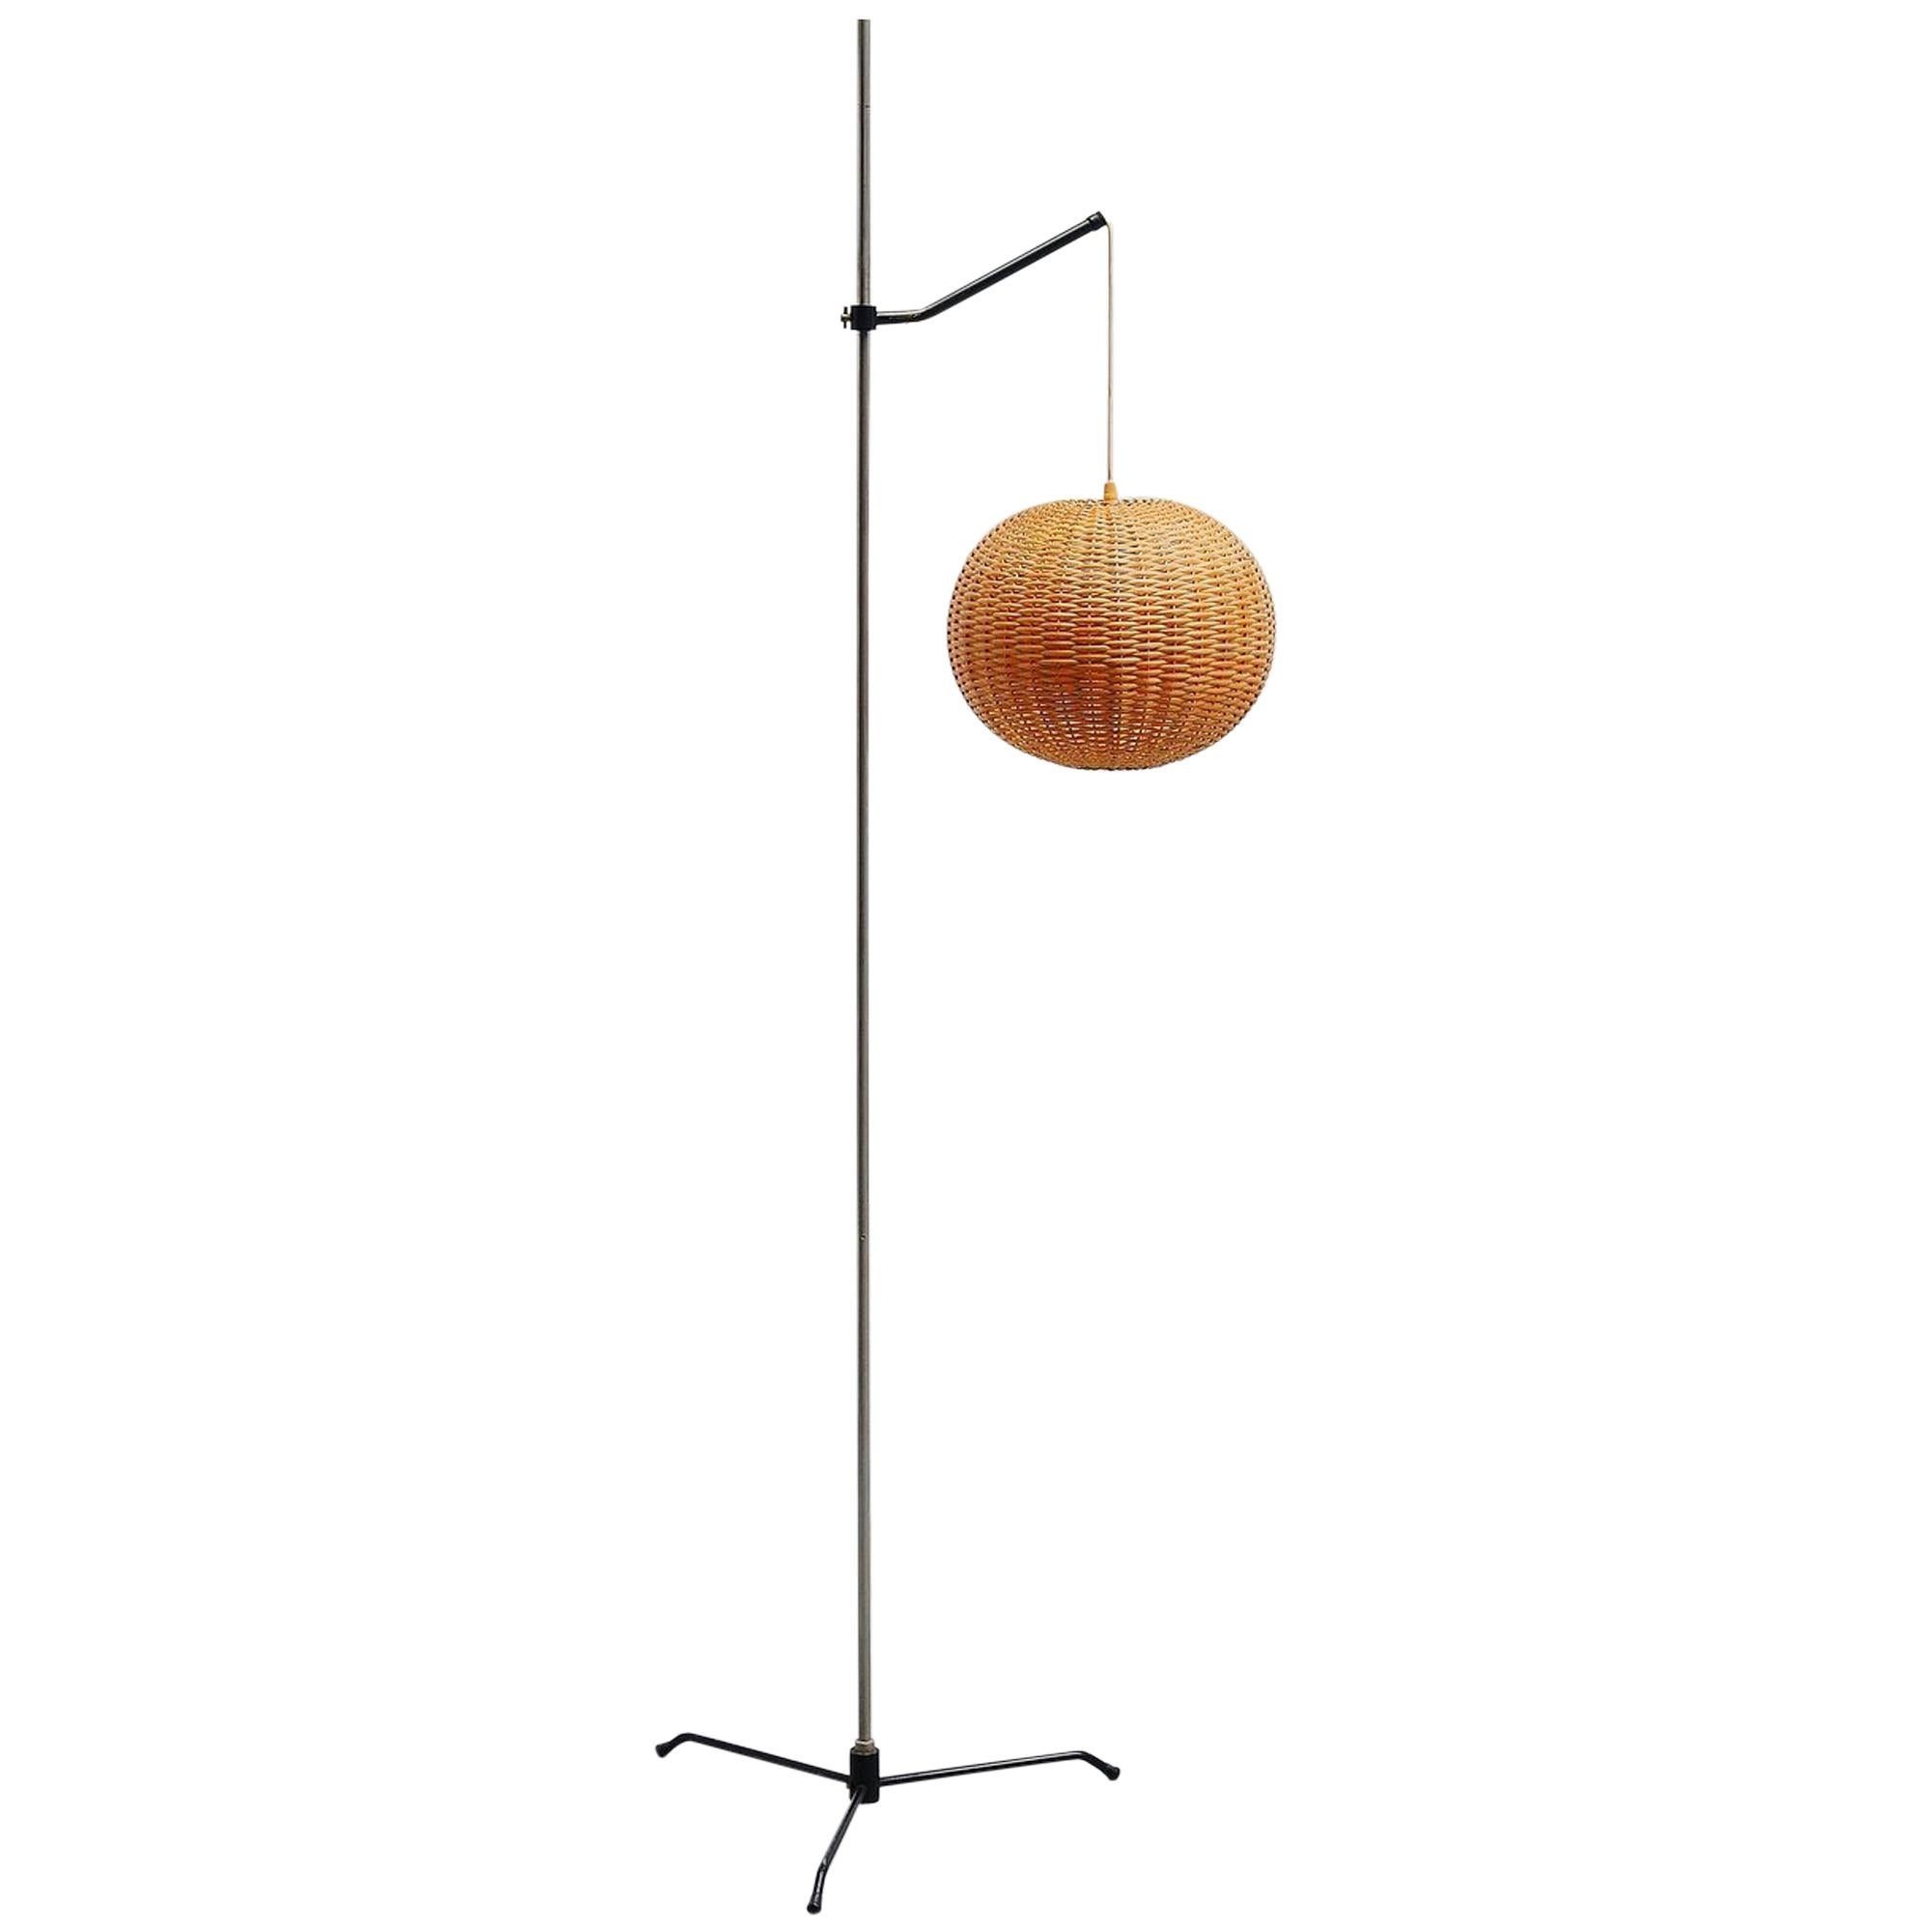 Unusual 1950s Floor Lamp with Cane Shade Holland, 1950